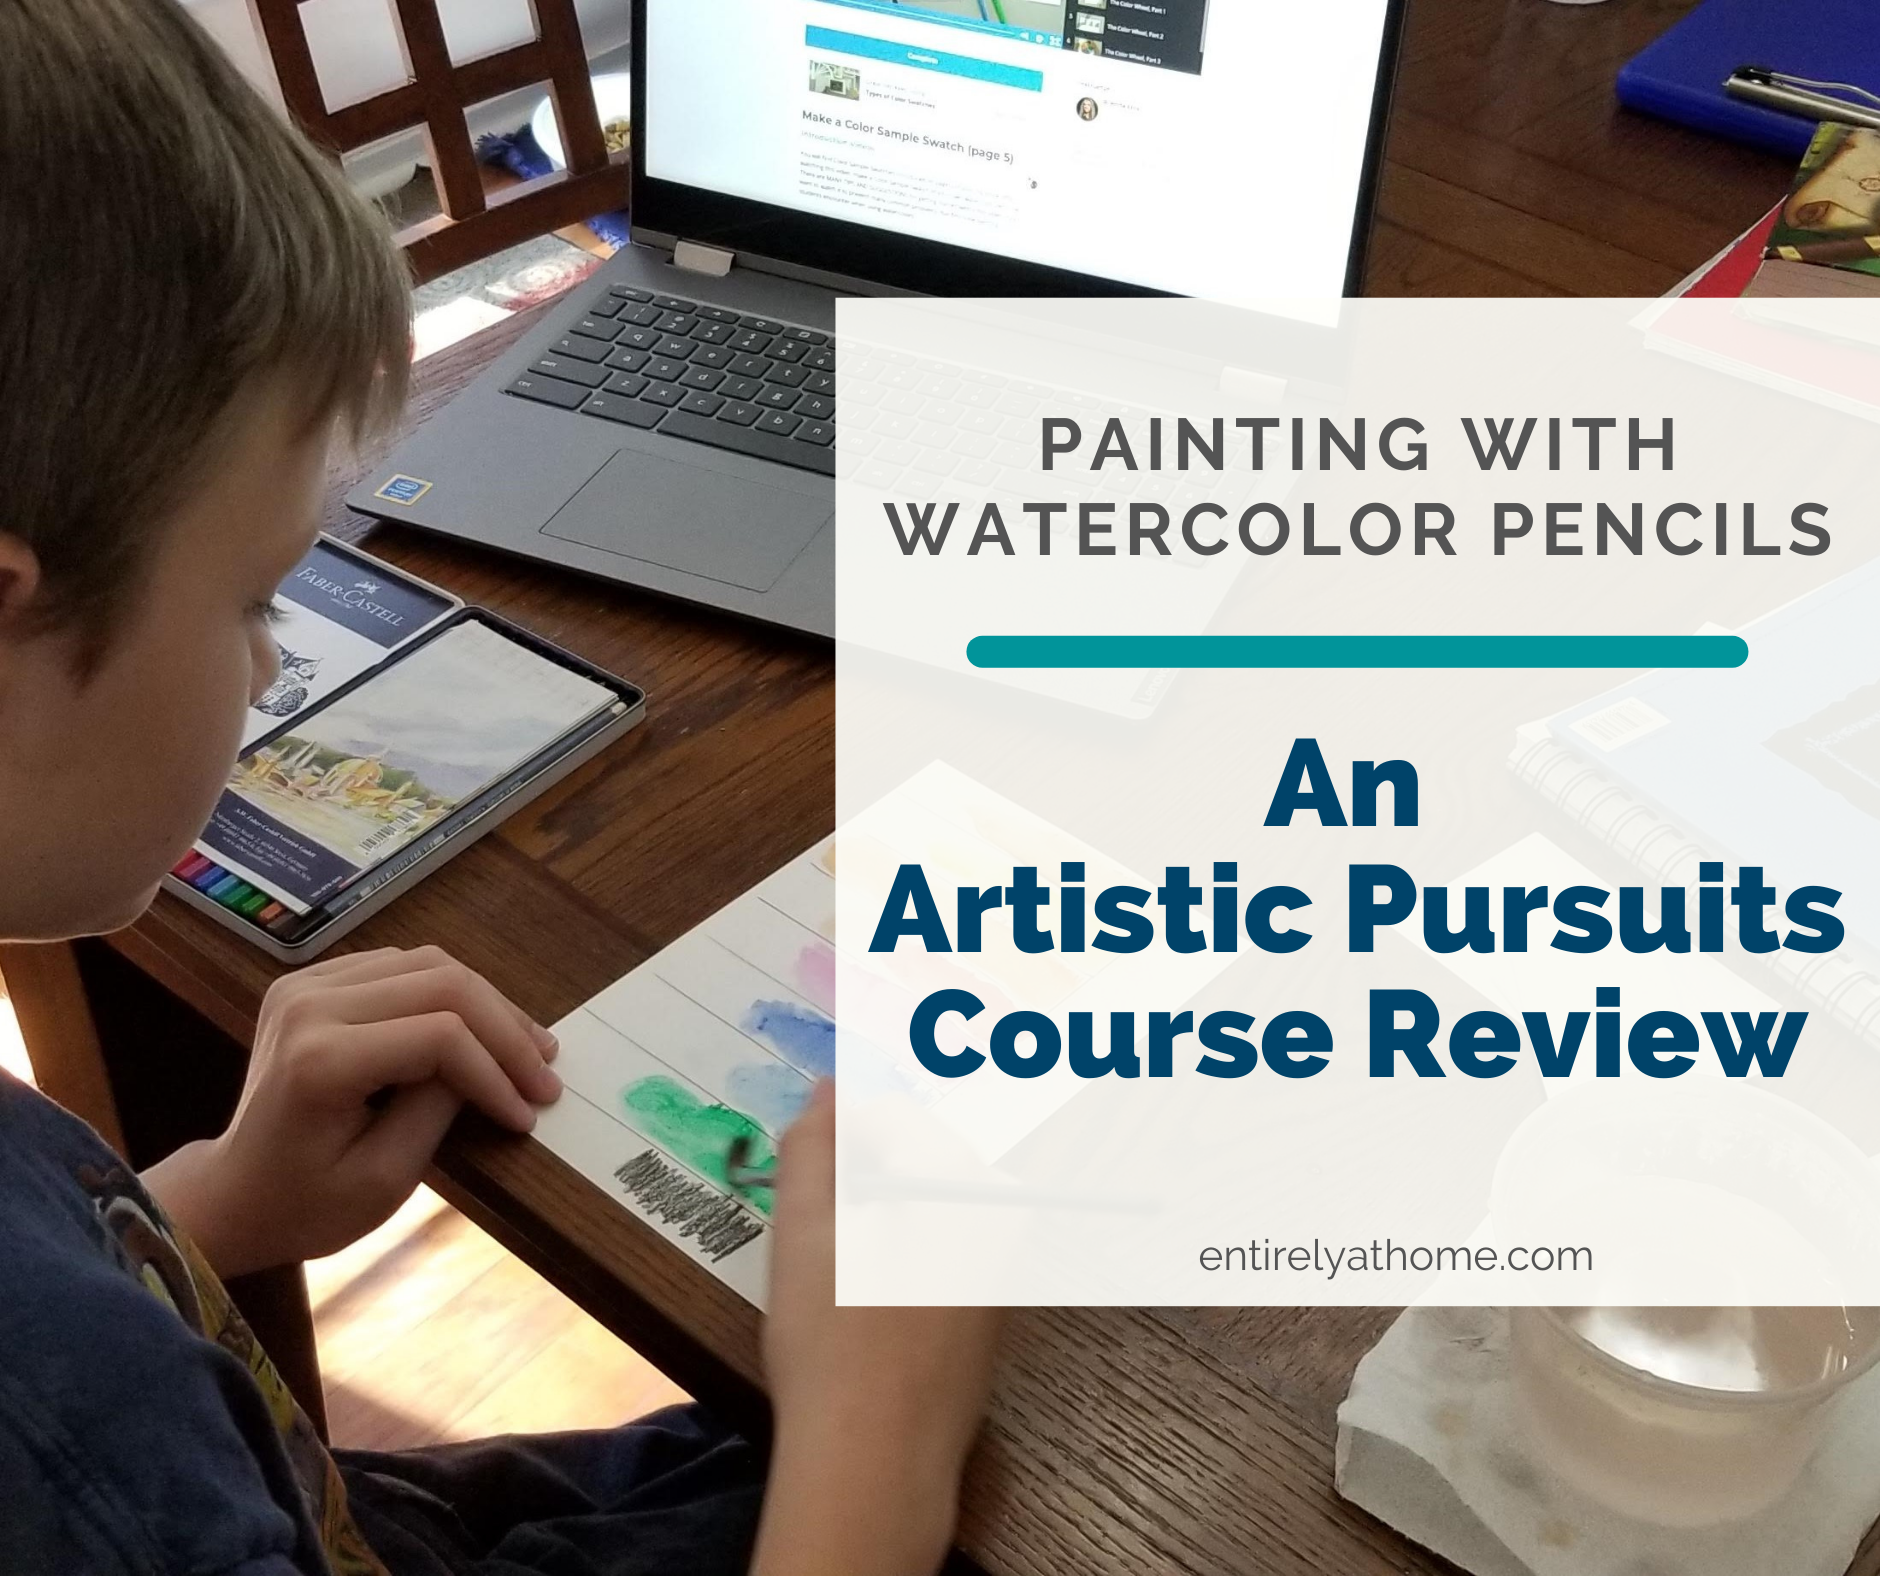 Complimentary Product Received ~ ARTistic Pursuits has an excellent new course, Beginner Level, Art Core 2, Painting with Watercolor Pencils, that we are enjoying using to learn art in our homeschool. #hsreviews #ARTisticPursuits #Art #Creative #arteducation #education